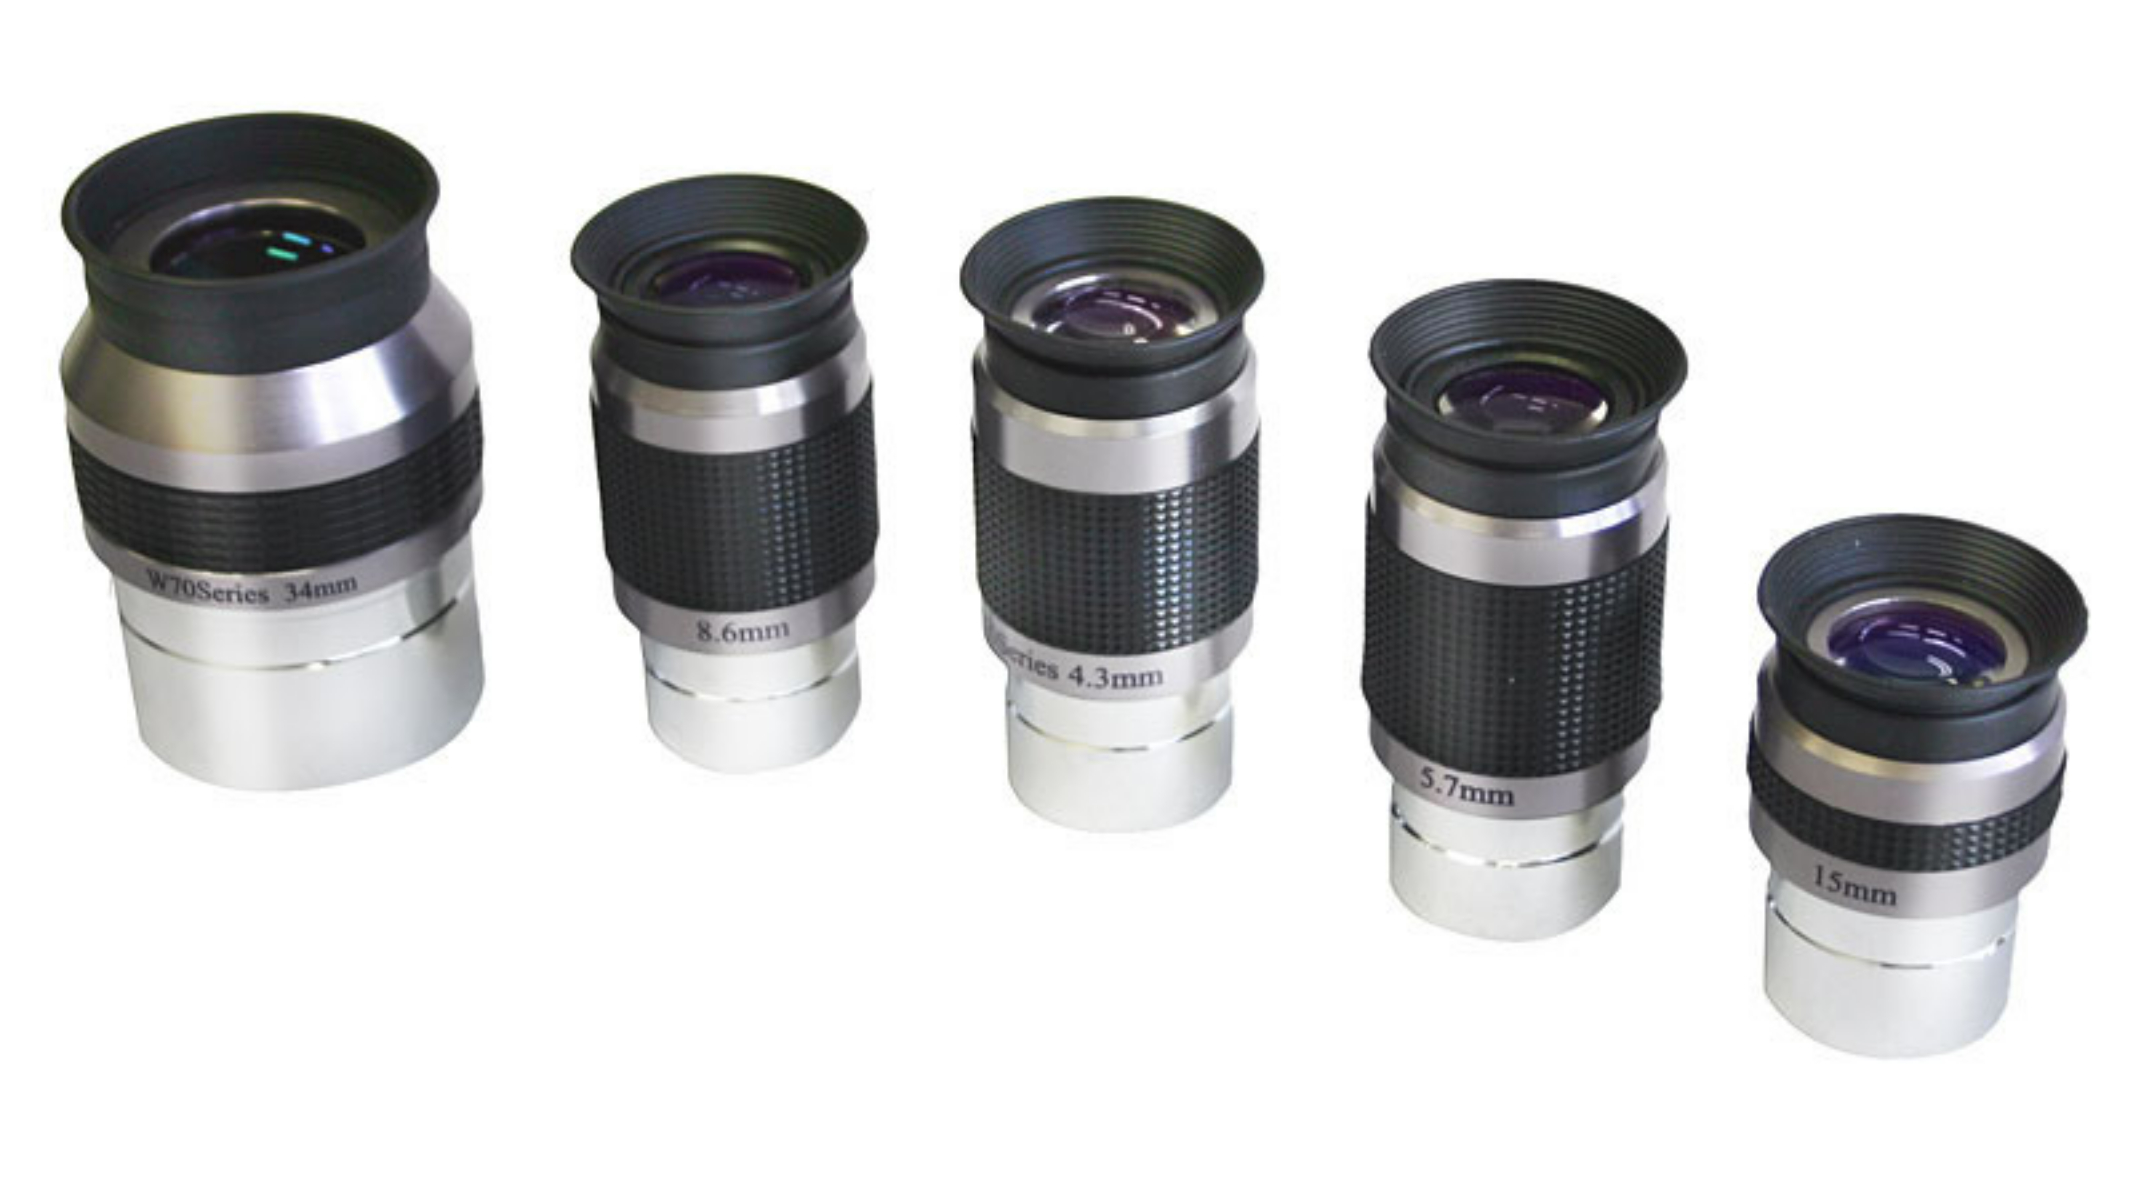 Product photos of the Antares W70 Widefield Eyepieces